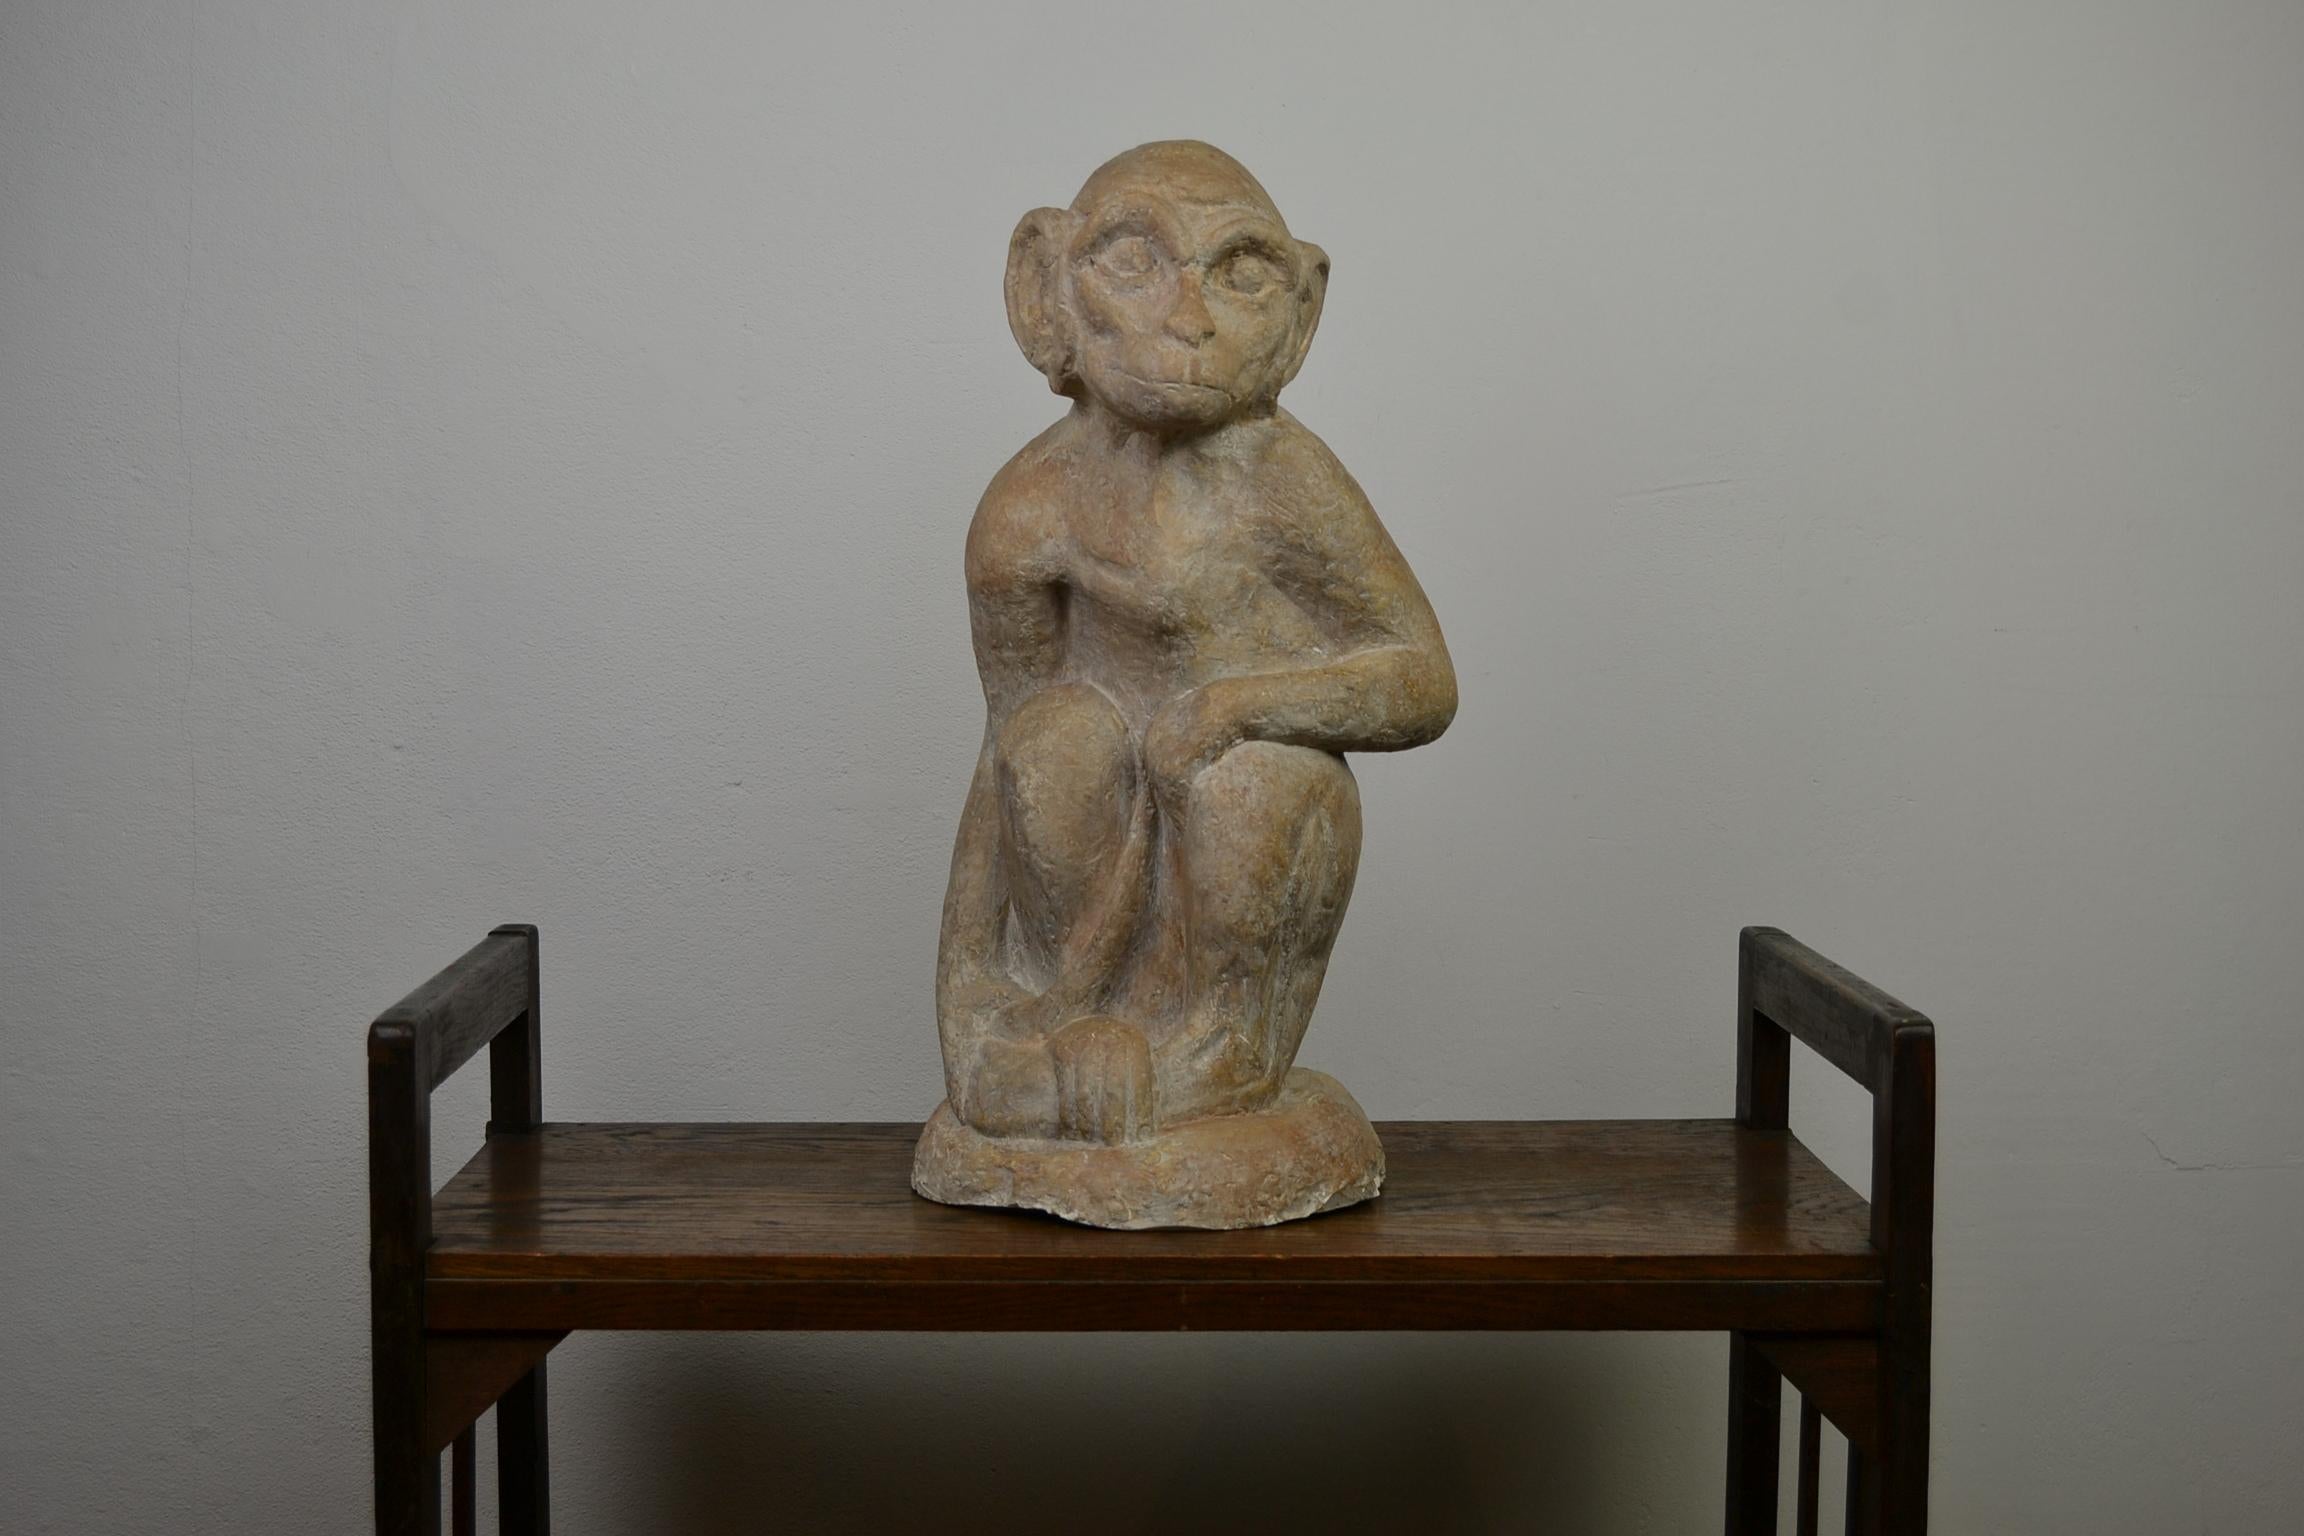 Stylish large plaster monkey sculpture.
This handmade animal sculpture of a sitting ape is not made from terracotta, but from gypsum or plaster. It's a life-size detailed monkey sculpture which will look great in your interior. Fits great in Organic